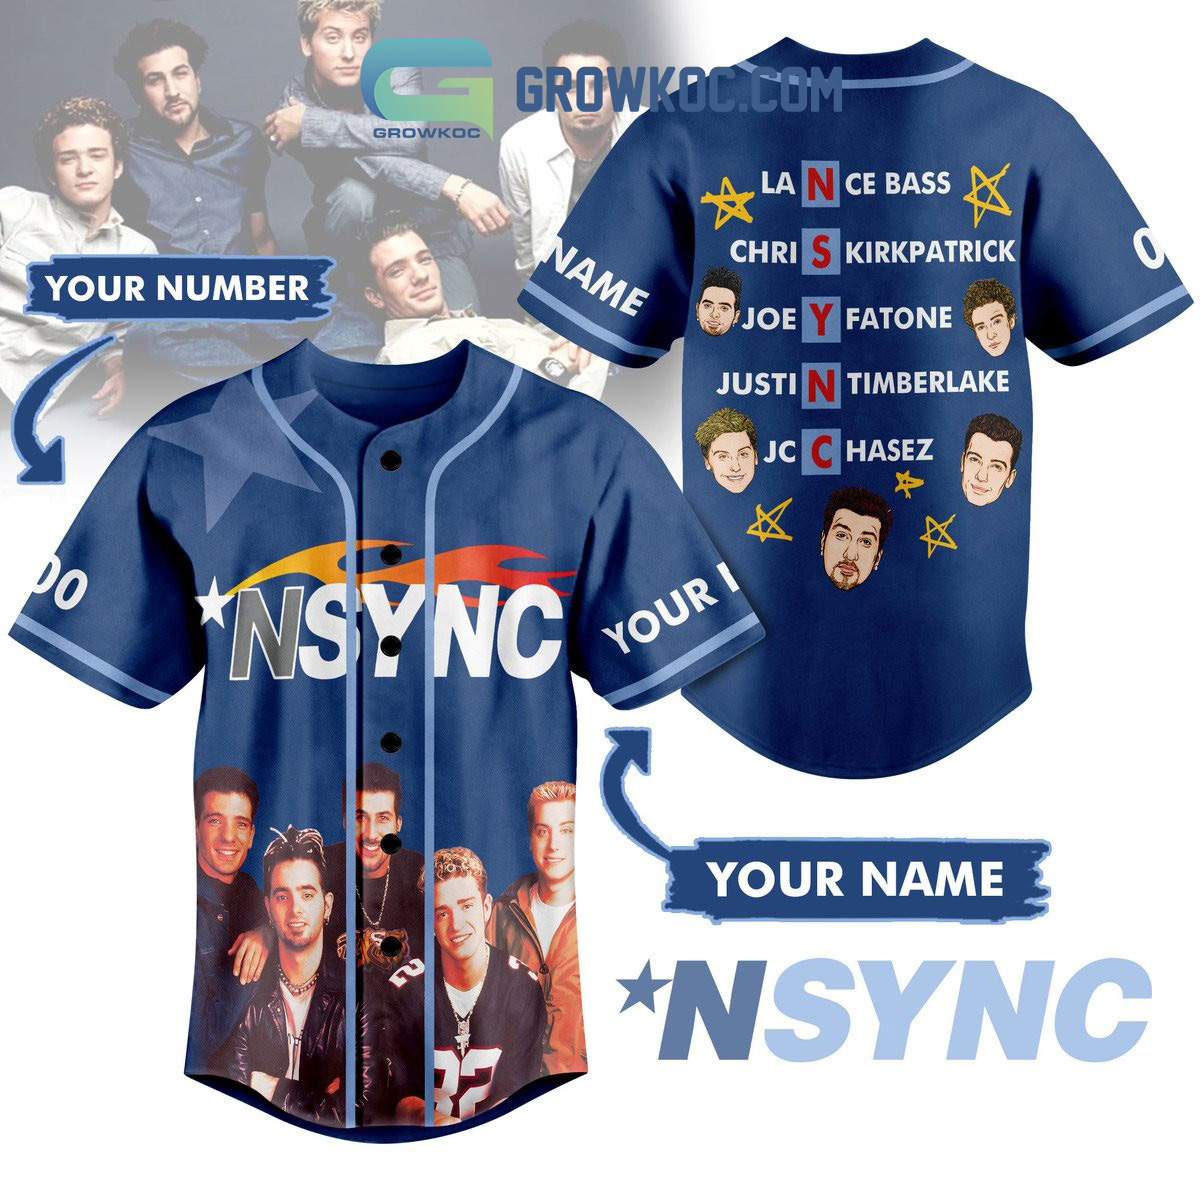 Brooklyn Dodgers Jerseys and T-Shirts Personalized for You